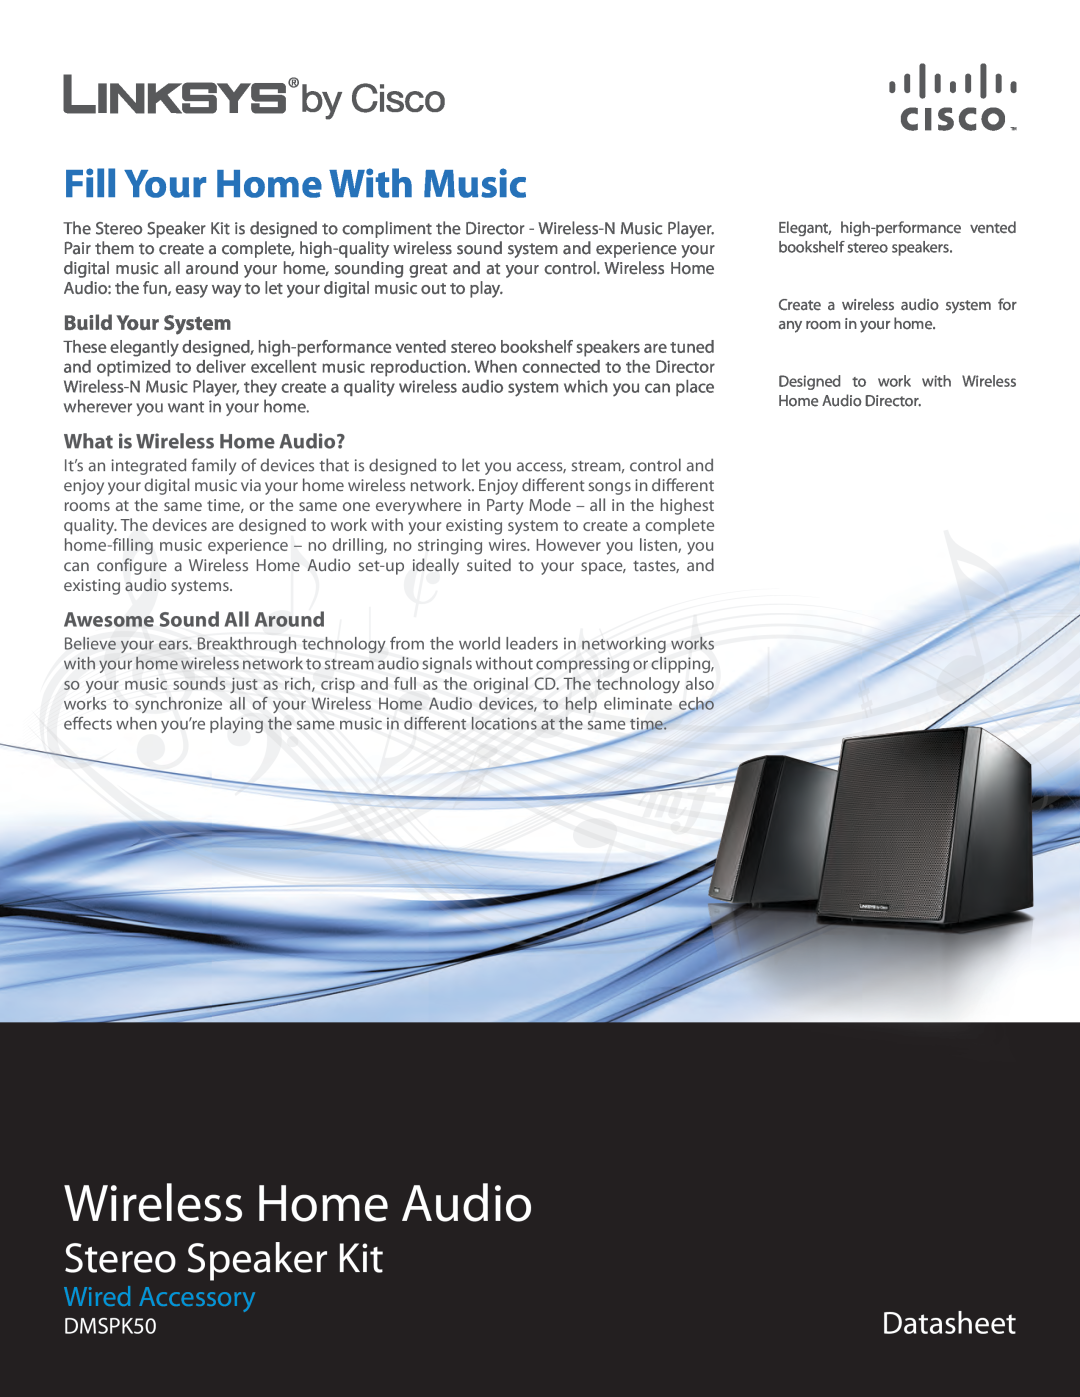 Linksys DMSPK50 manual Wireless Home Audio, Stereo Speaker Kit, Fill Your Home With Music, Datasheet, Wired Accessory 